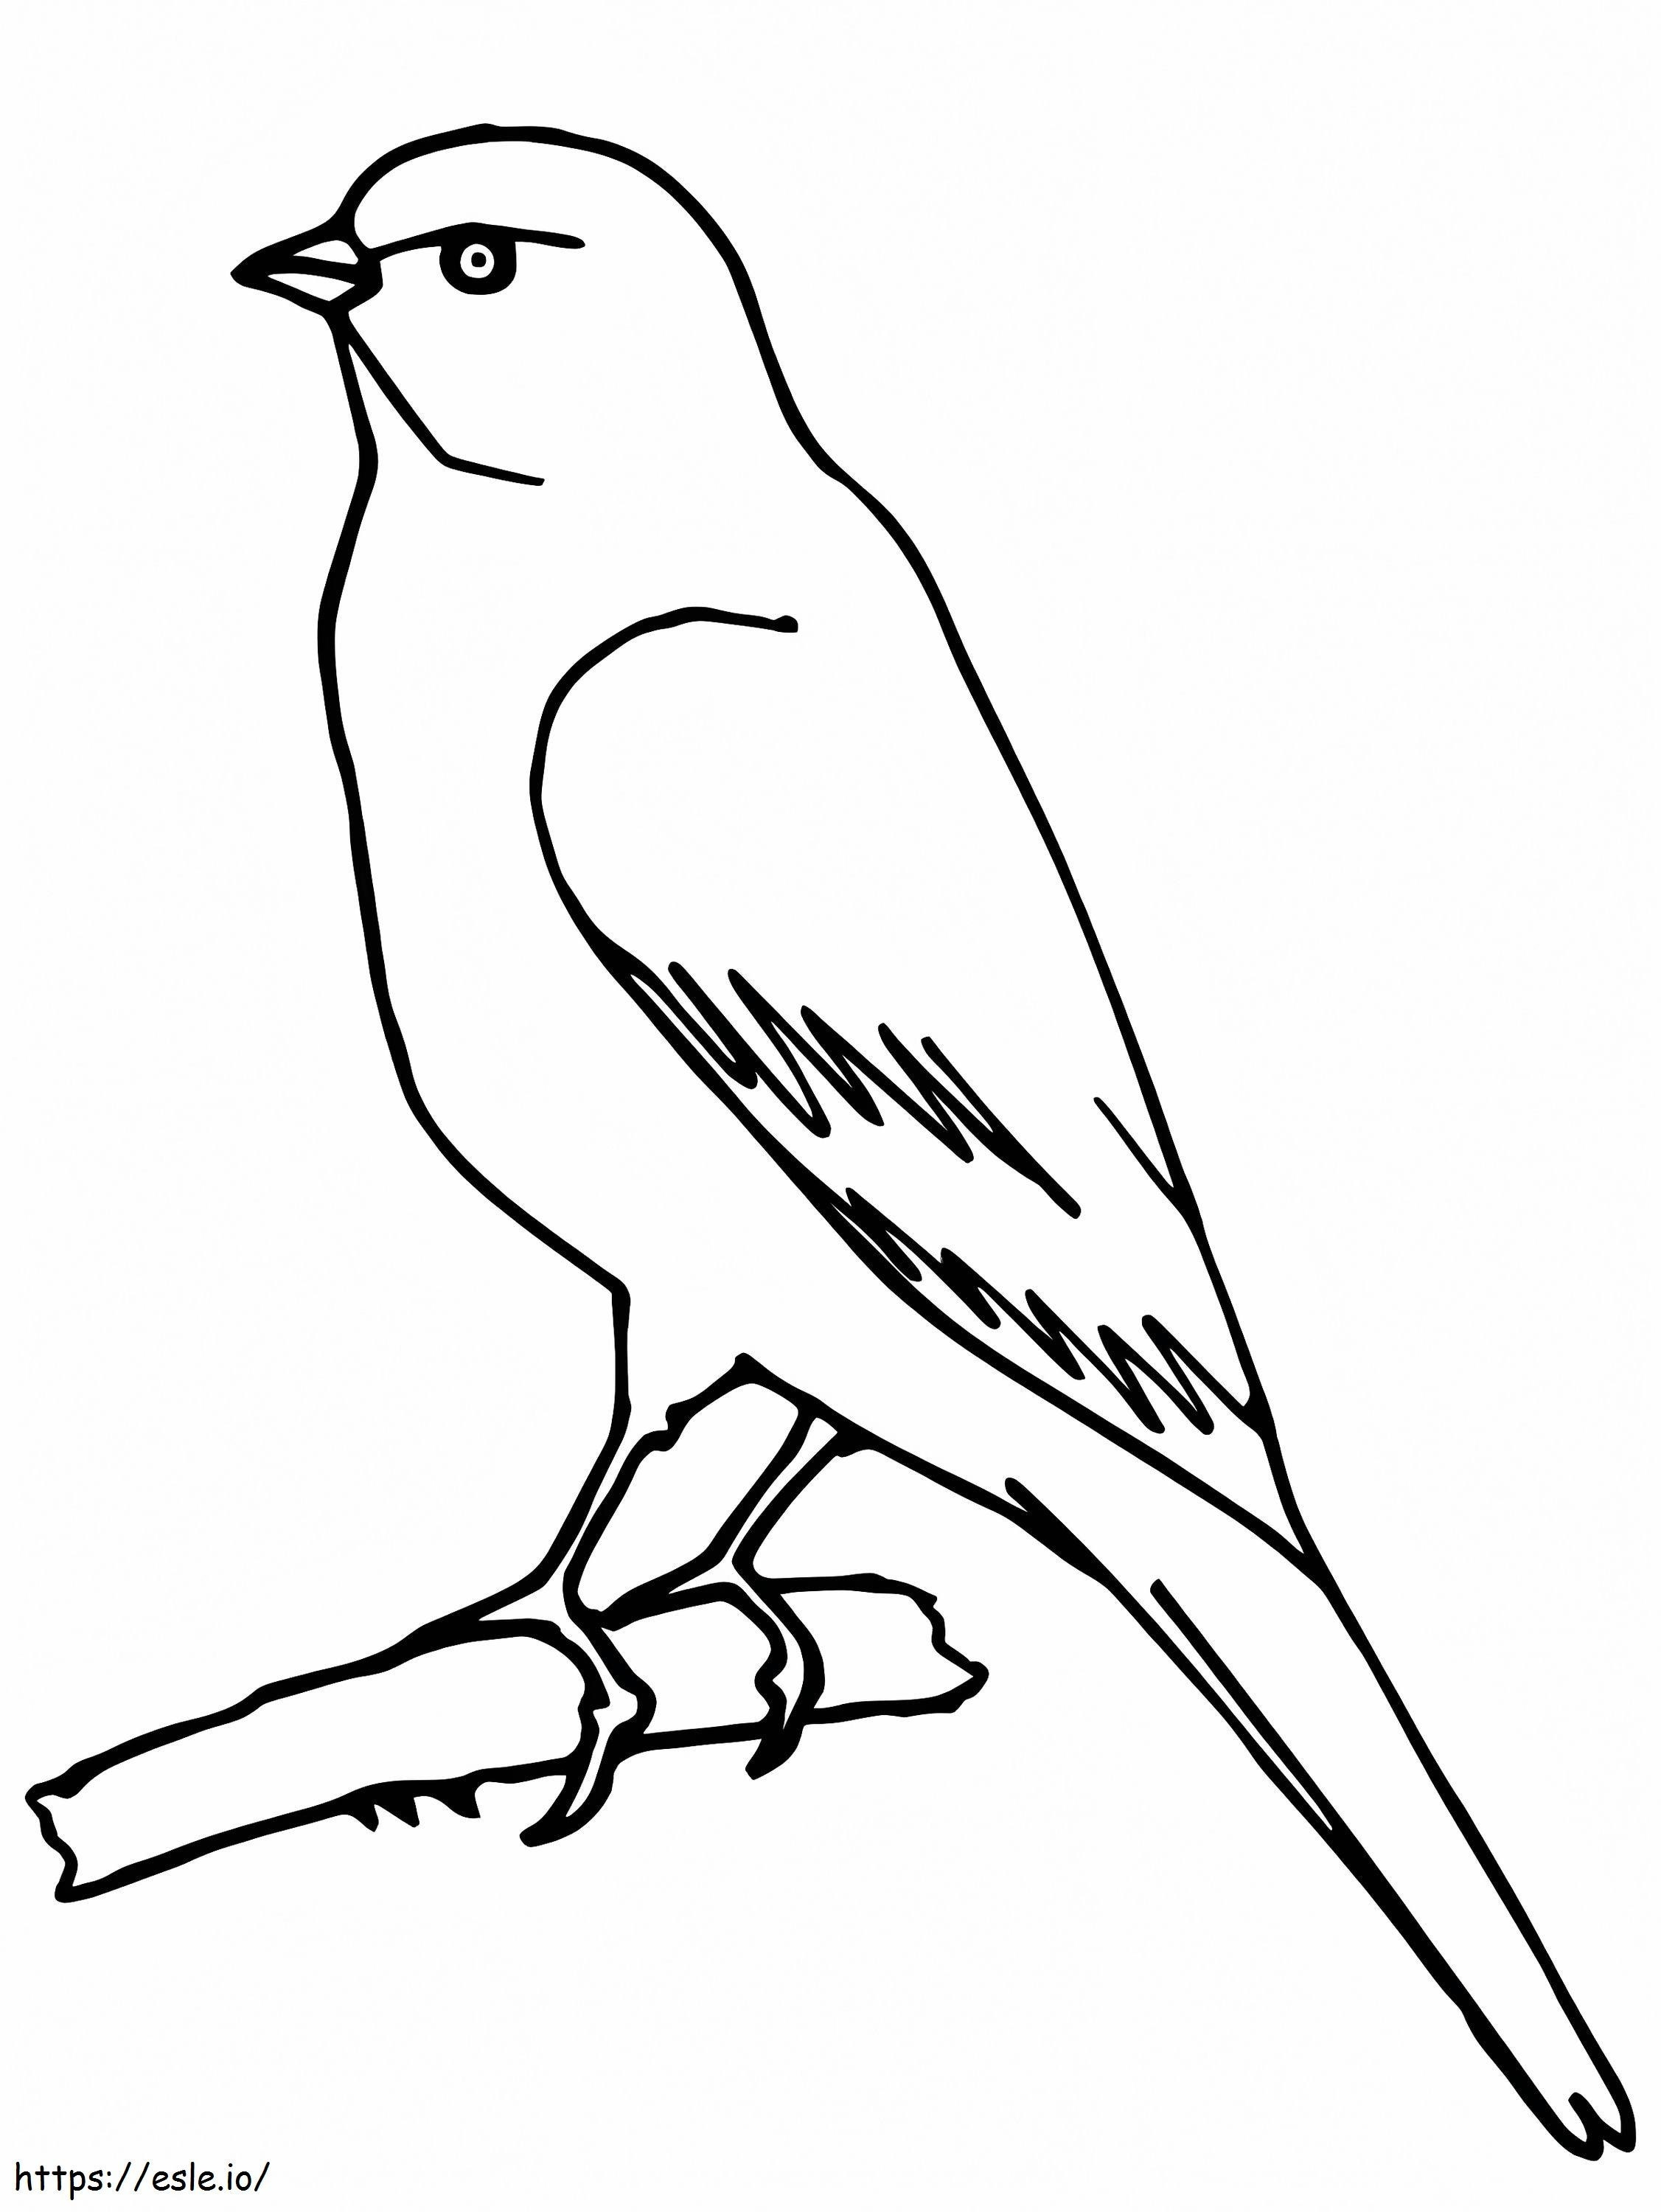 Normal Canary coloring page